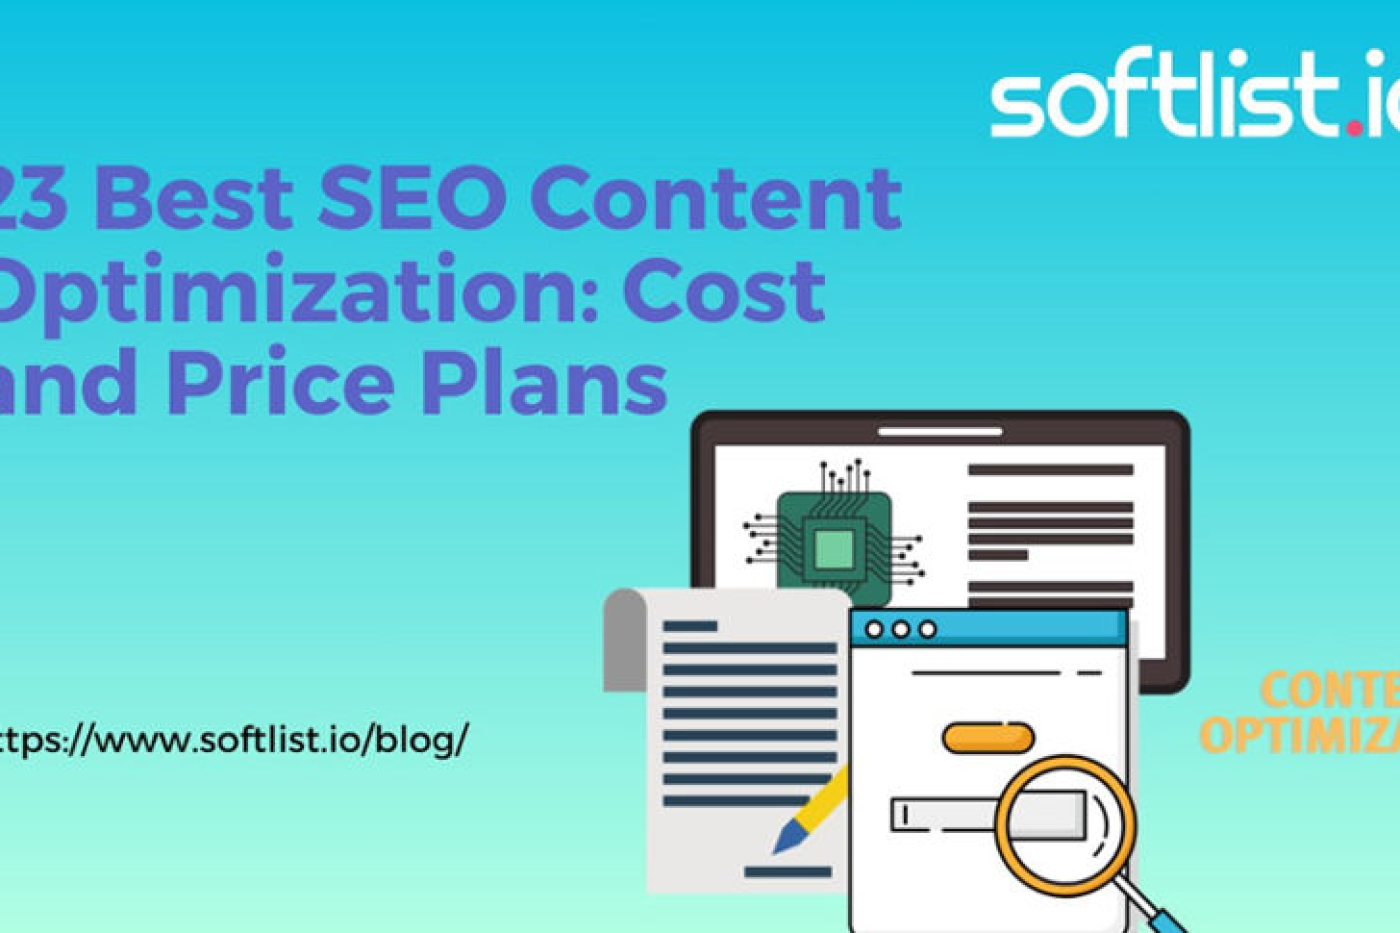 Guide to the 23 Top SEO Content Optimization Plans